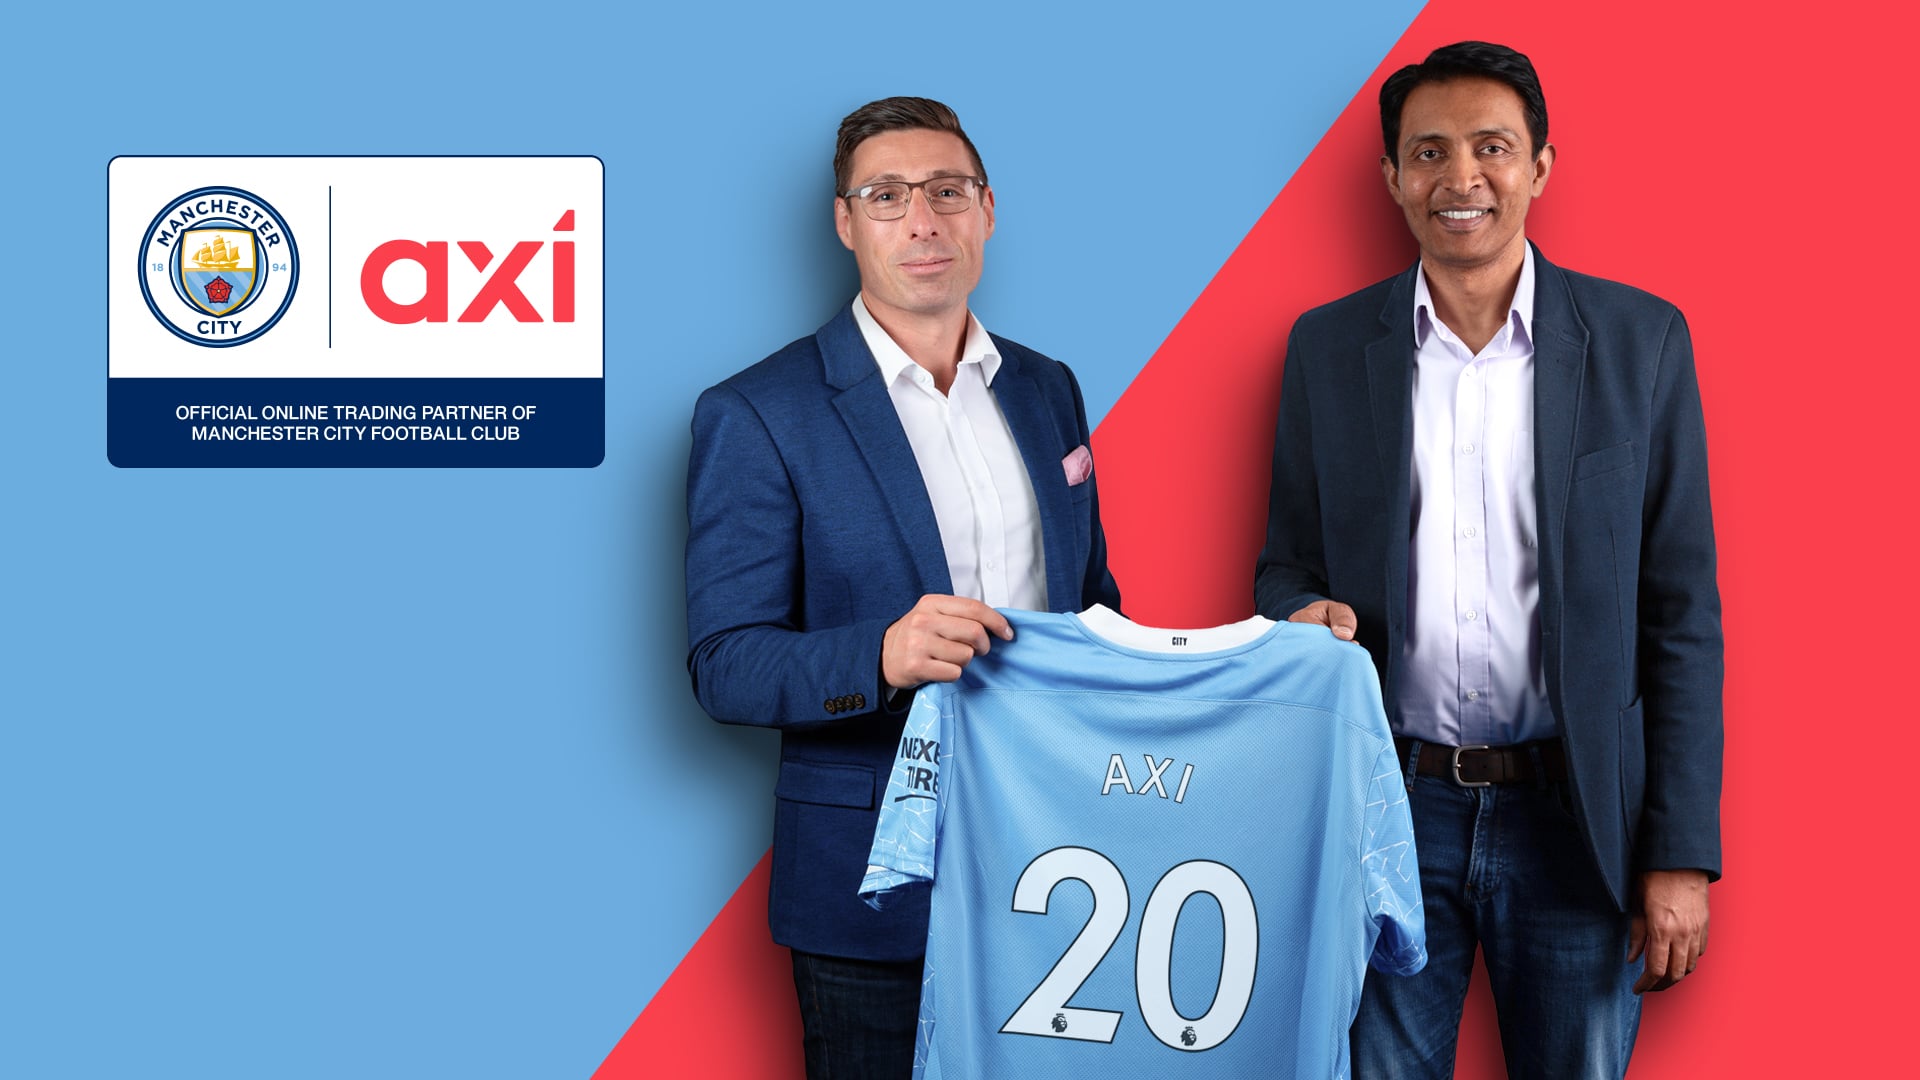 Axi CCO Louis Cooper on Rebranding and Partnering With Manchester City